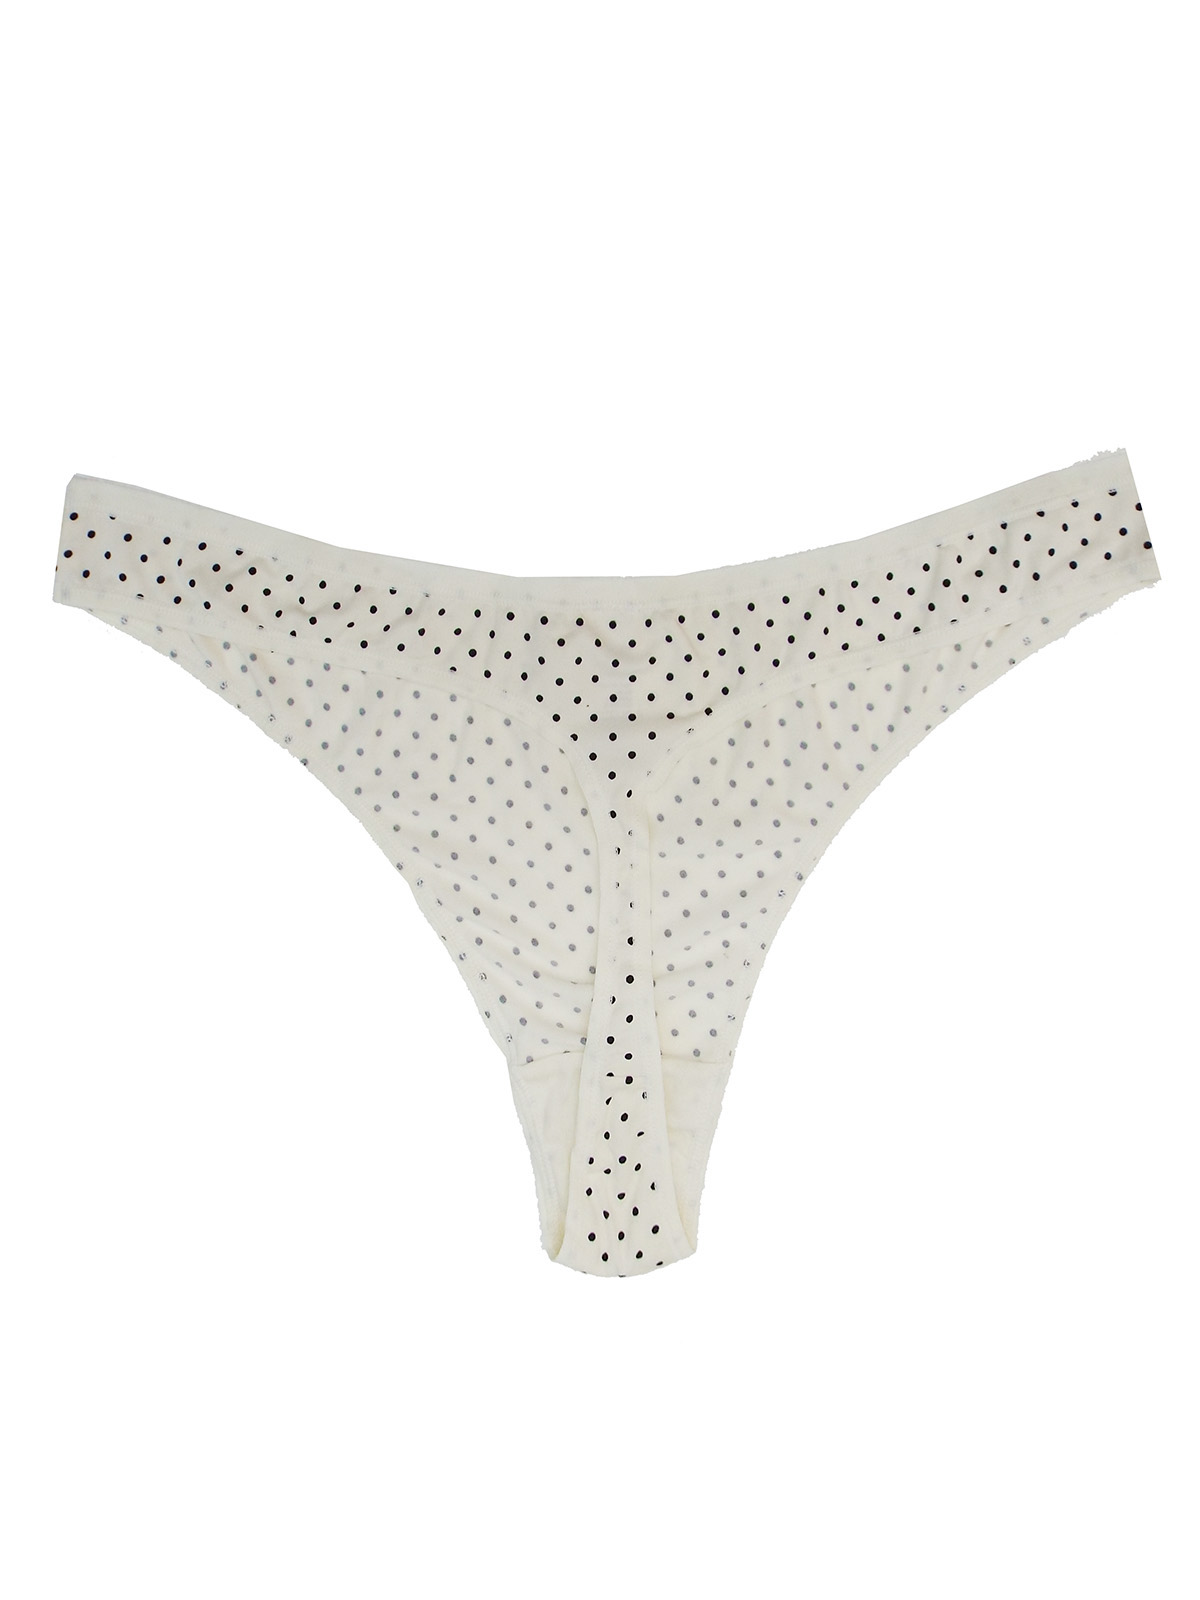 Marks and Spencer - - M&5 BLACK Spot Print No VPL Thong - Plus Size 14 ...